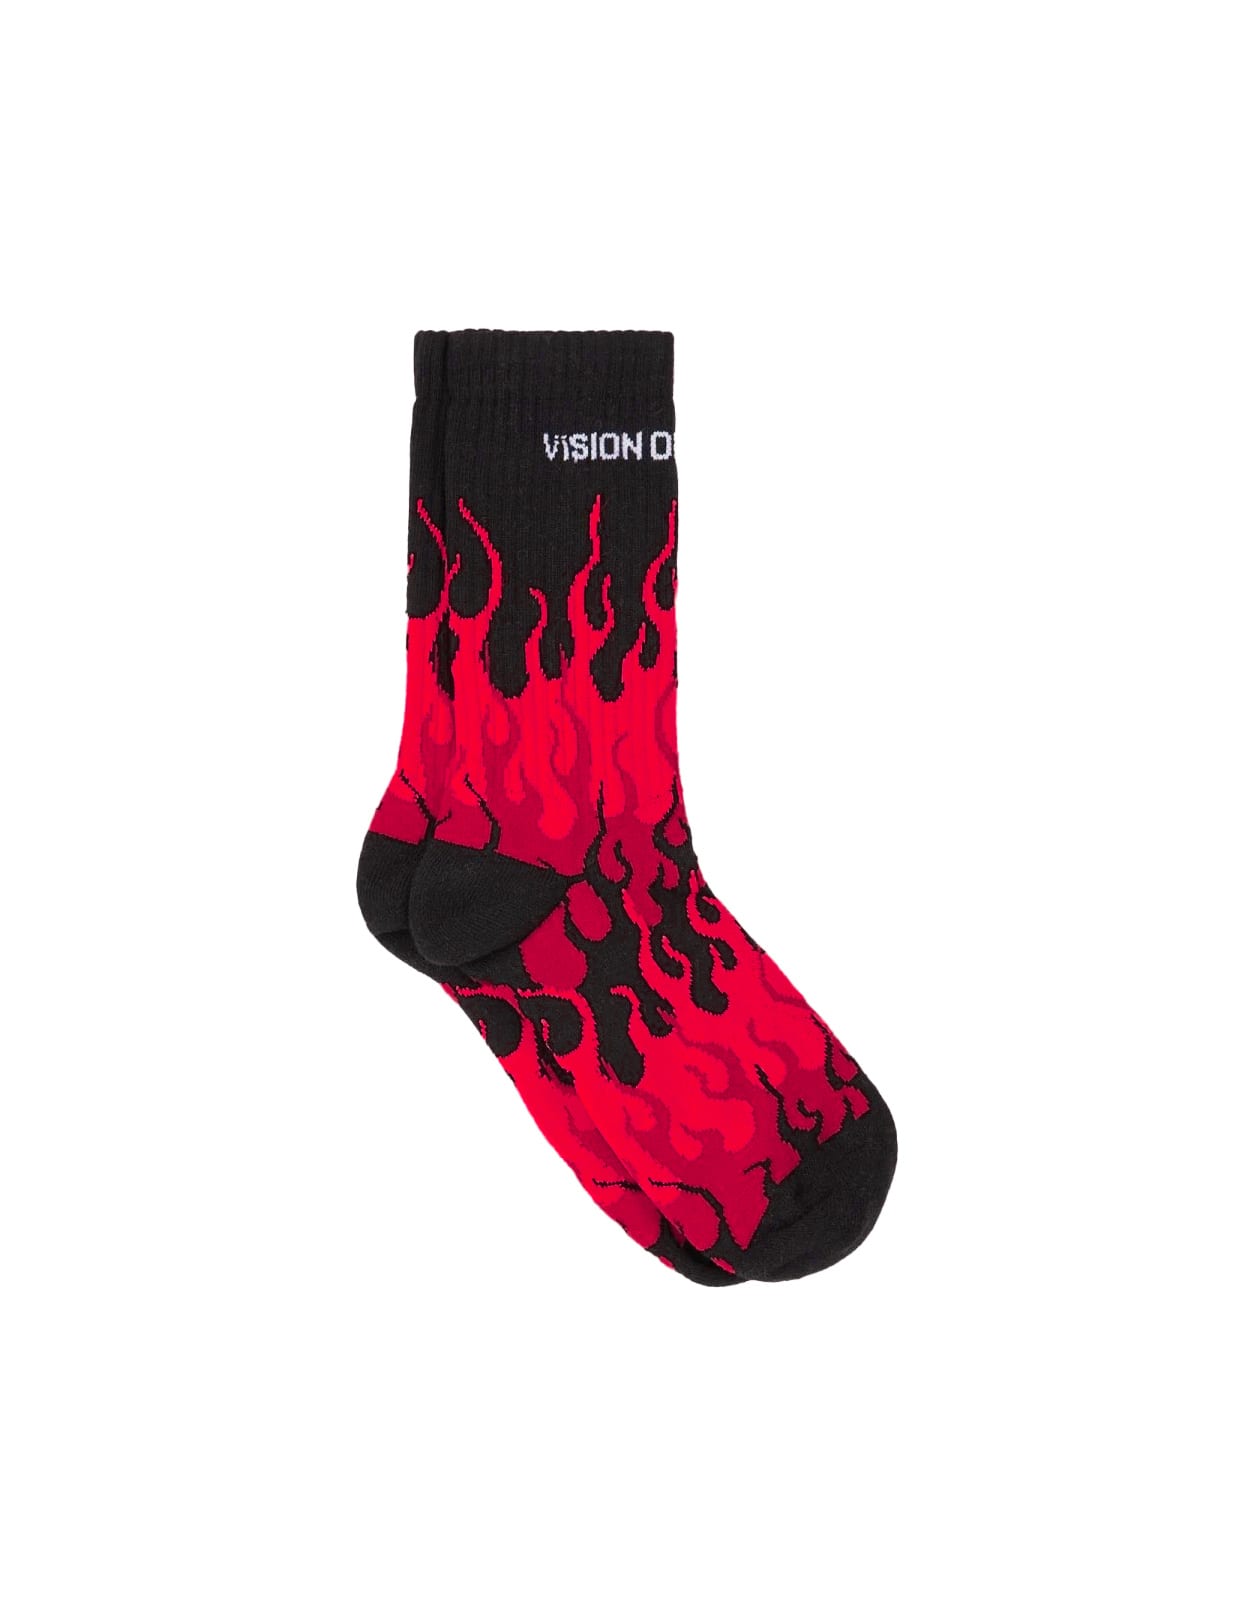 Vision Of Super Black Socks With Triple Red Flame